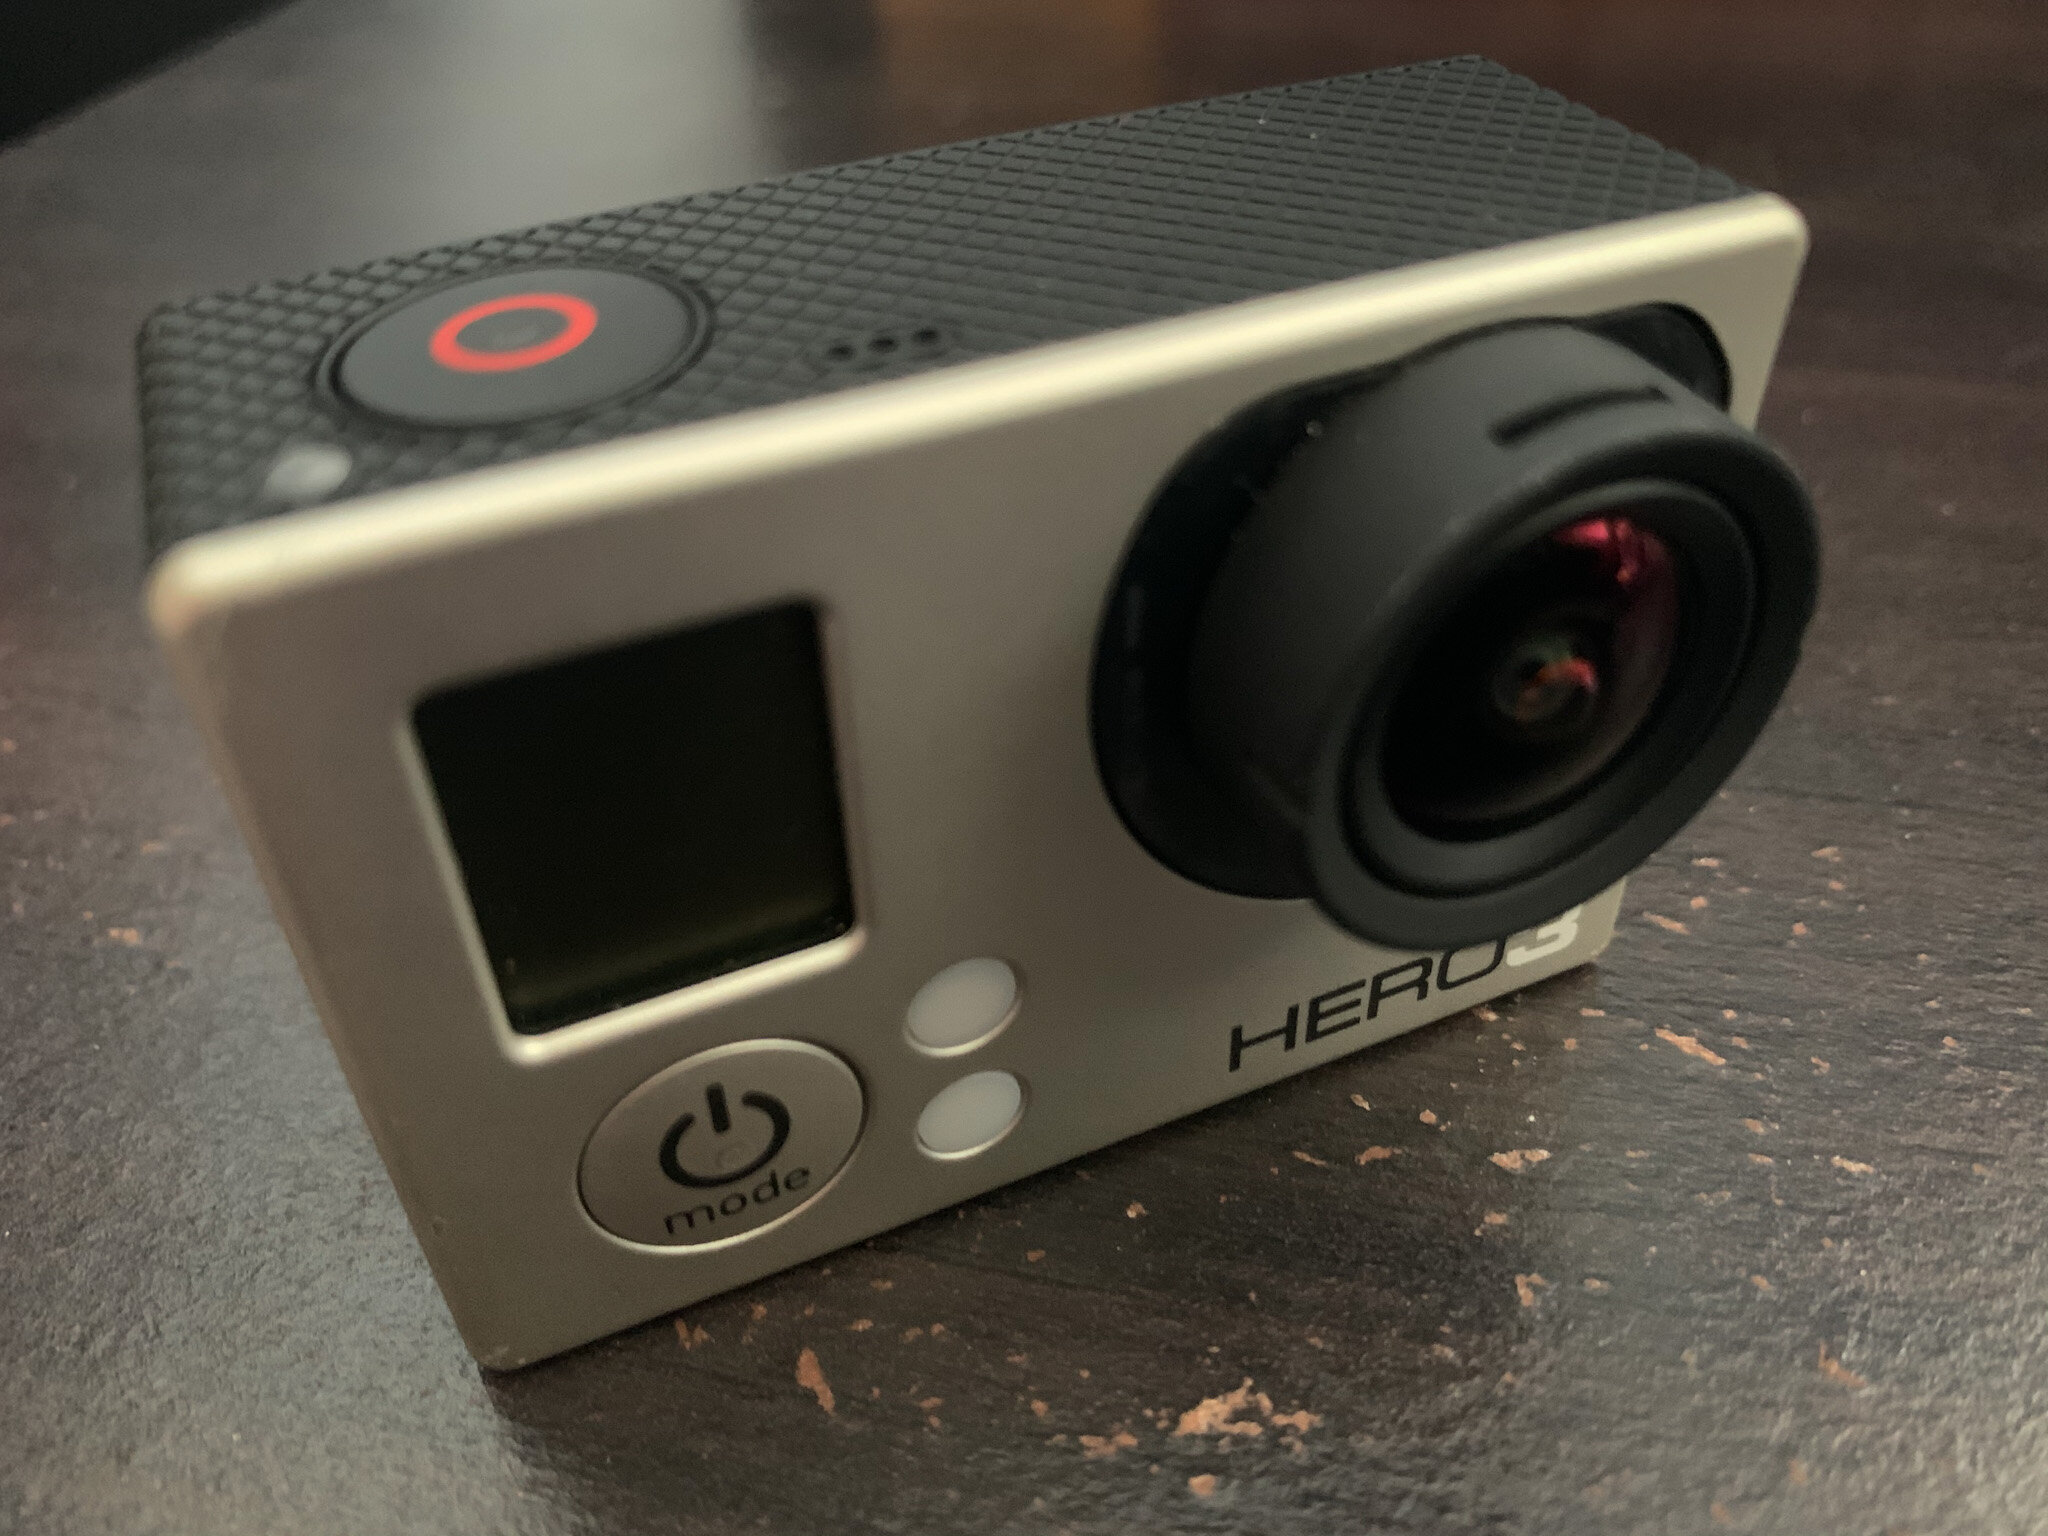 honor staining Therapy Reviewed: GoPro HERO 3 — Travelling Tom | A UK travel blog